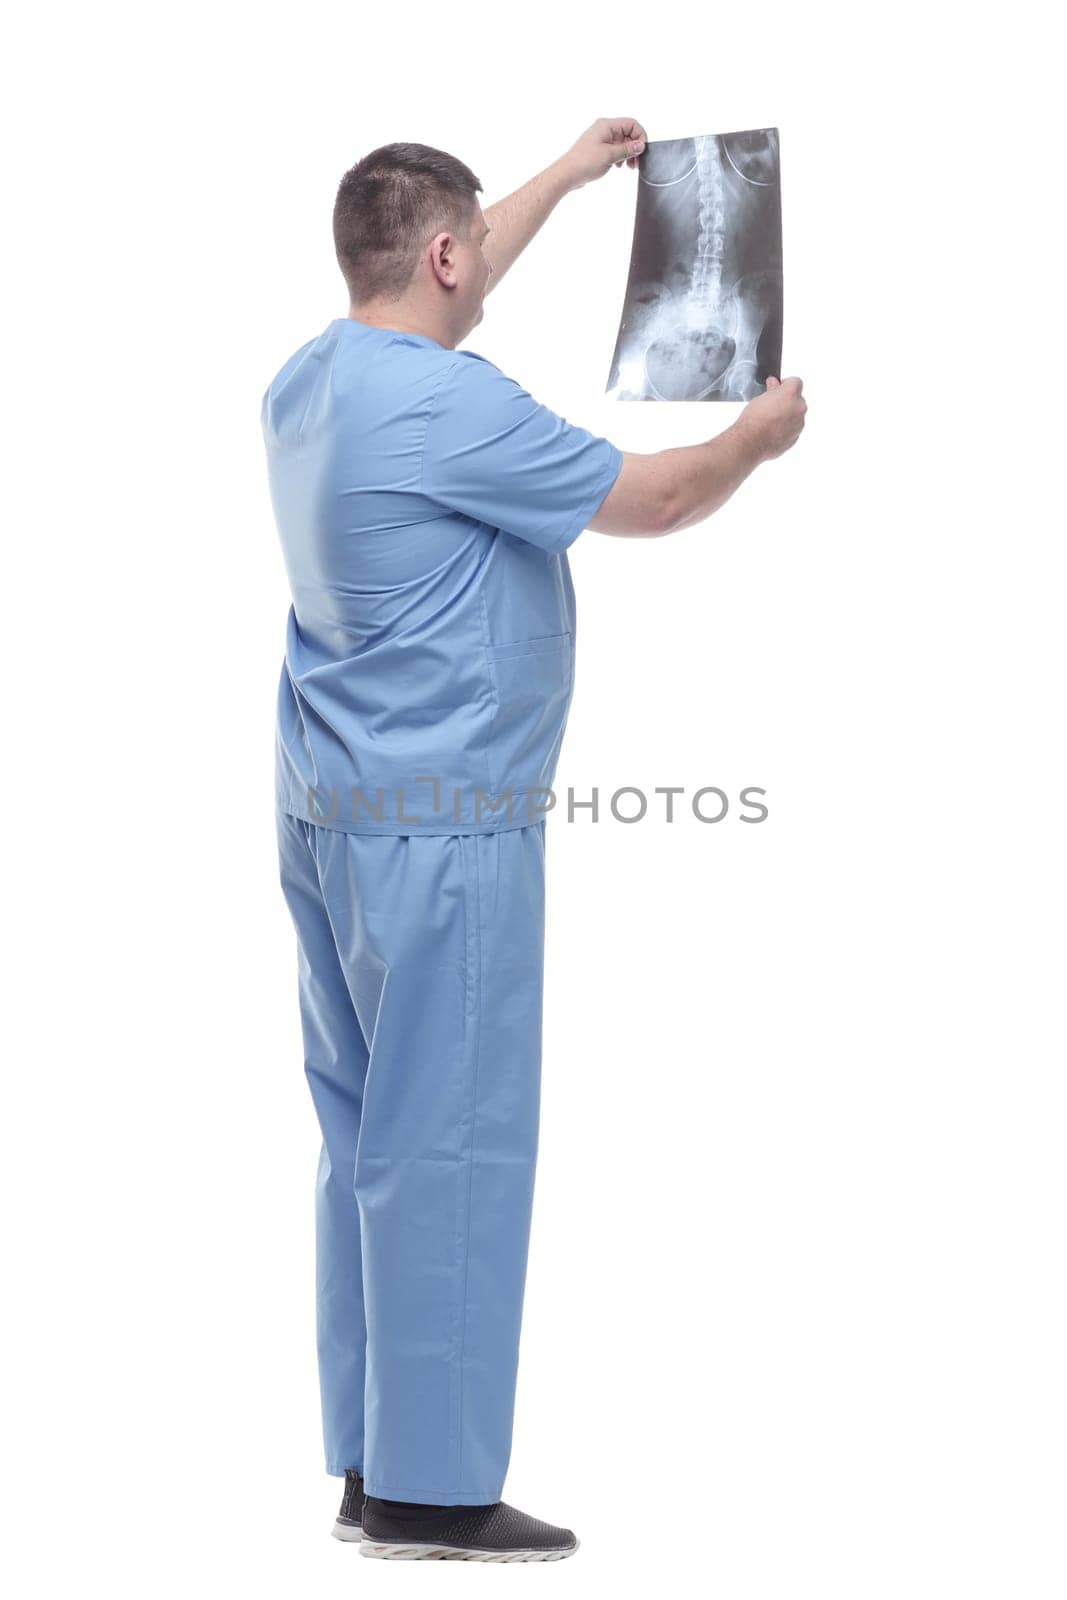 male medic with a chest x-ray. isolated on a white background.